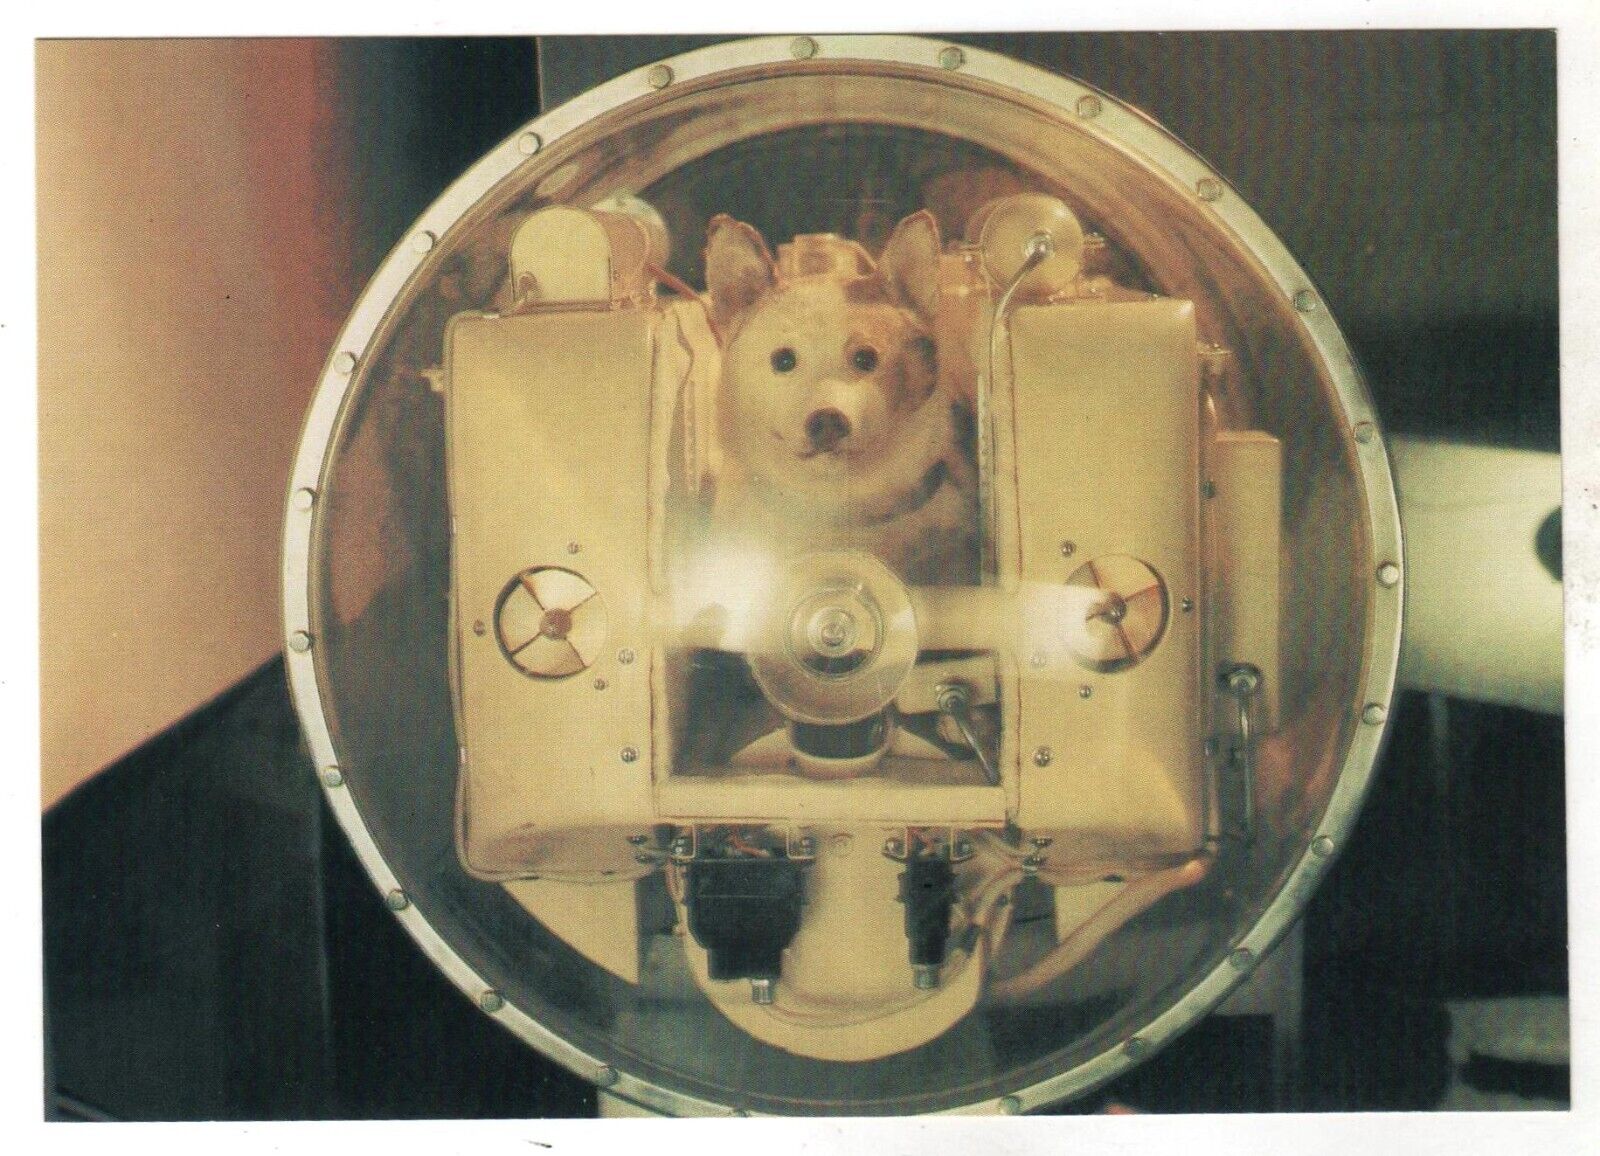 1985 SPACE DOG Laika The 1st passenger of space trip Russian Photo postcard OLD